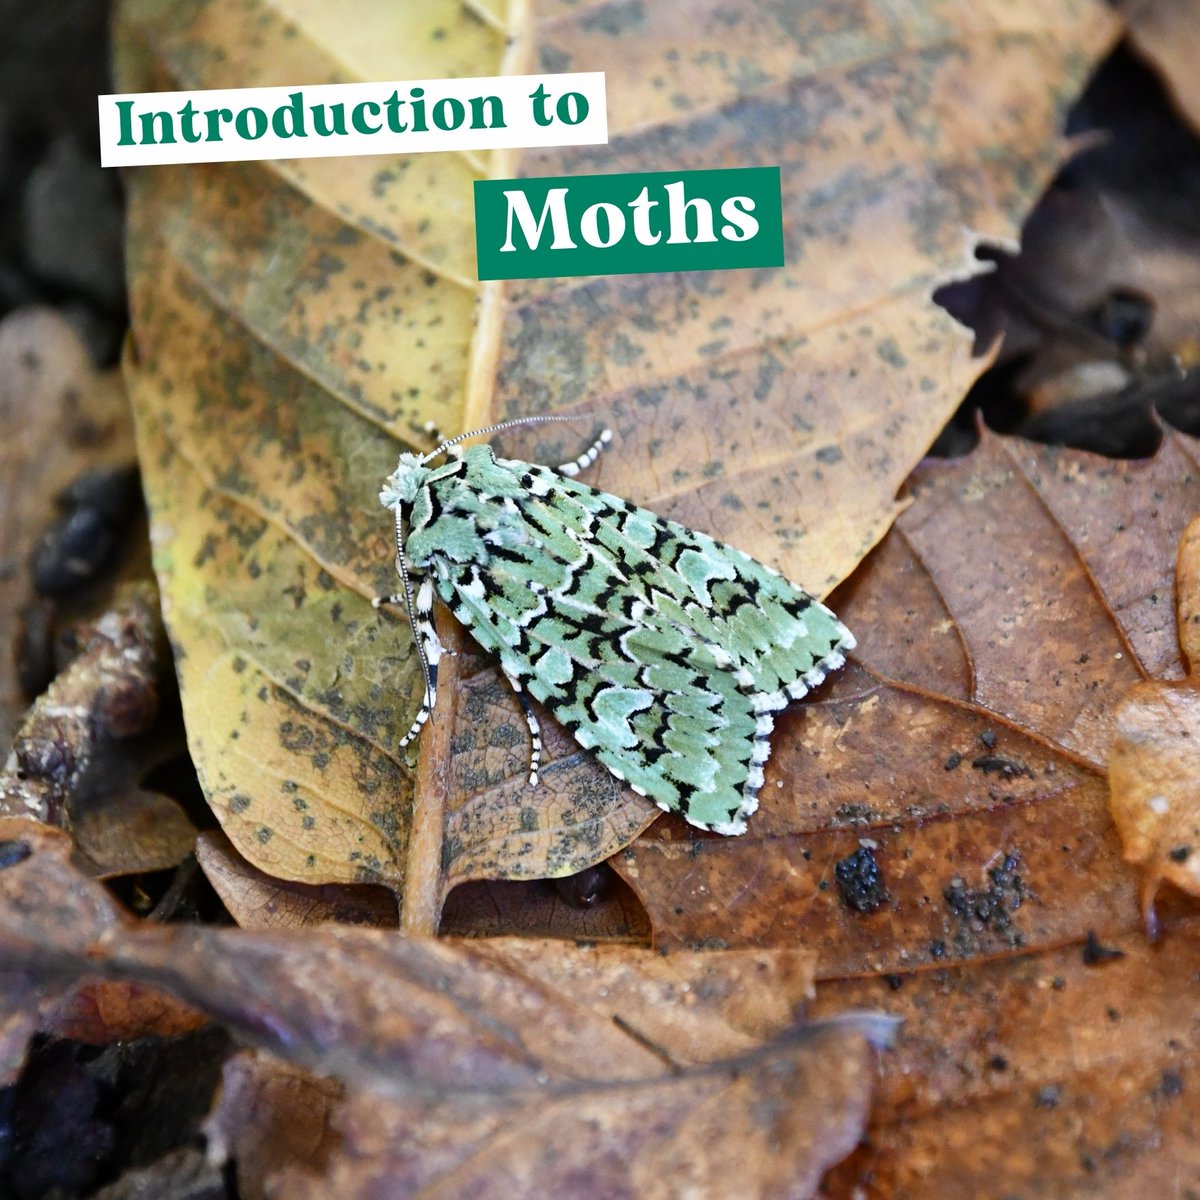 Coming up in May 🦋 🔍 Habitat Surveying: An Introduction 🐸 Working with Natterjack Toads 🌸 Wildflowers: An Introduction to Botanical Skills 🦋 Introduction to Moth Trapping These are just some of the courses coming up in May - view all: ow.ly/N1wk50RcaTR